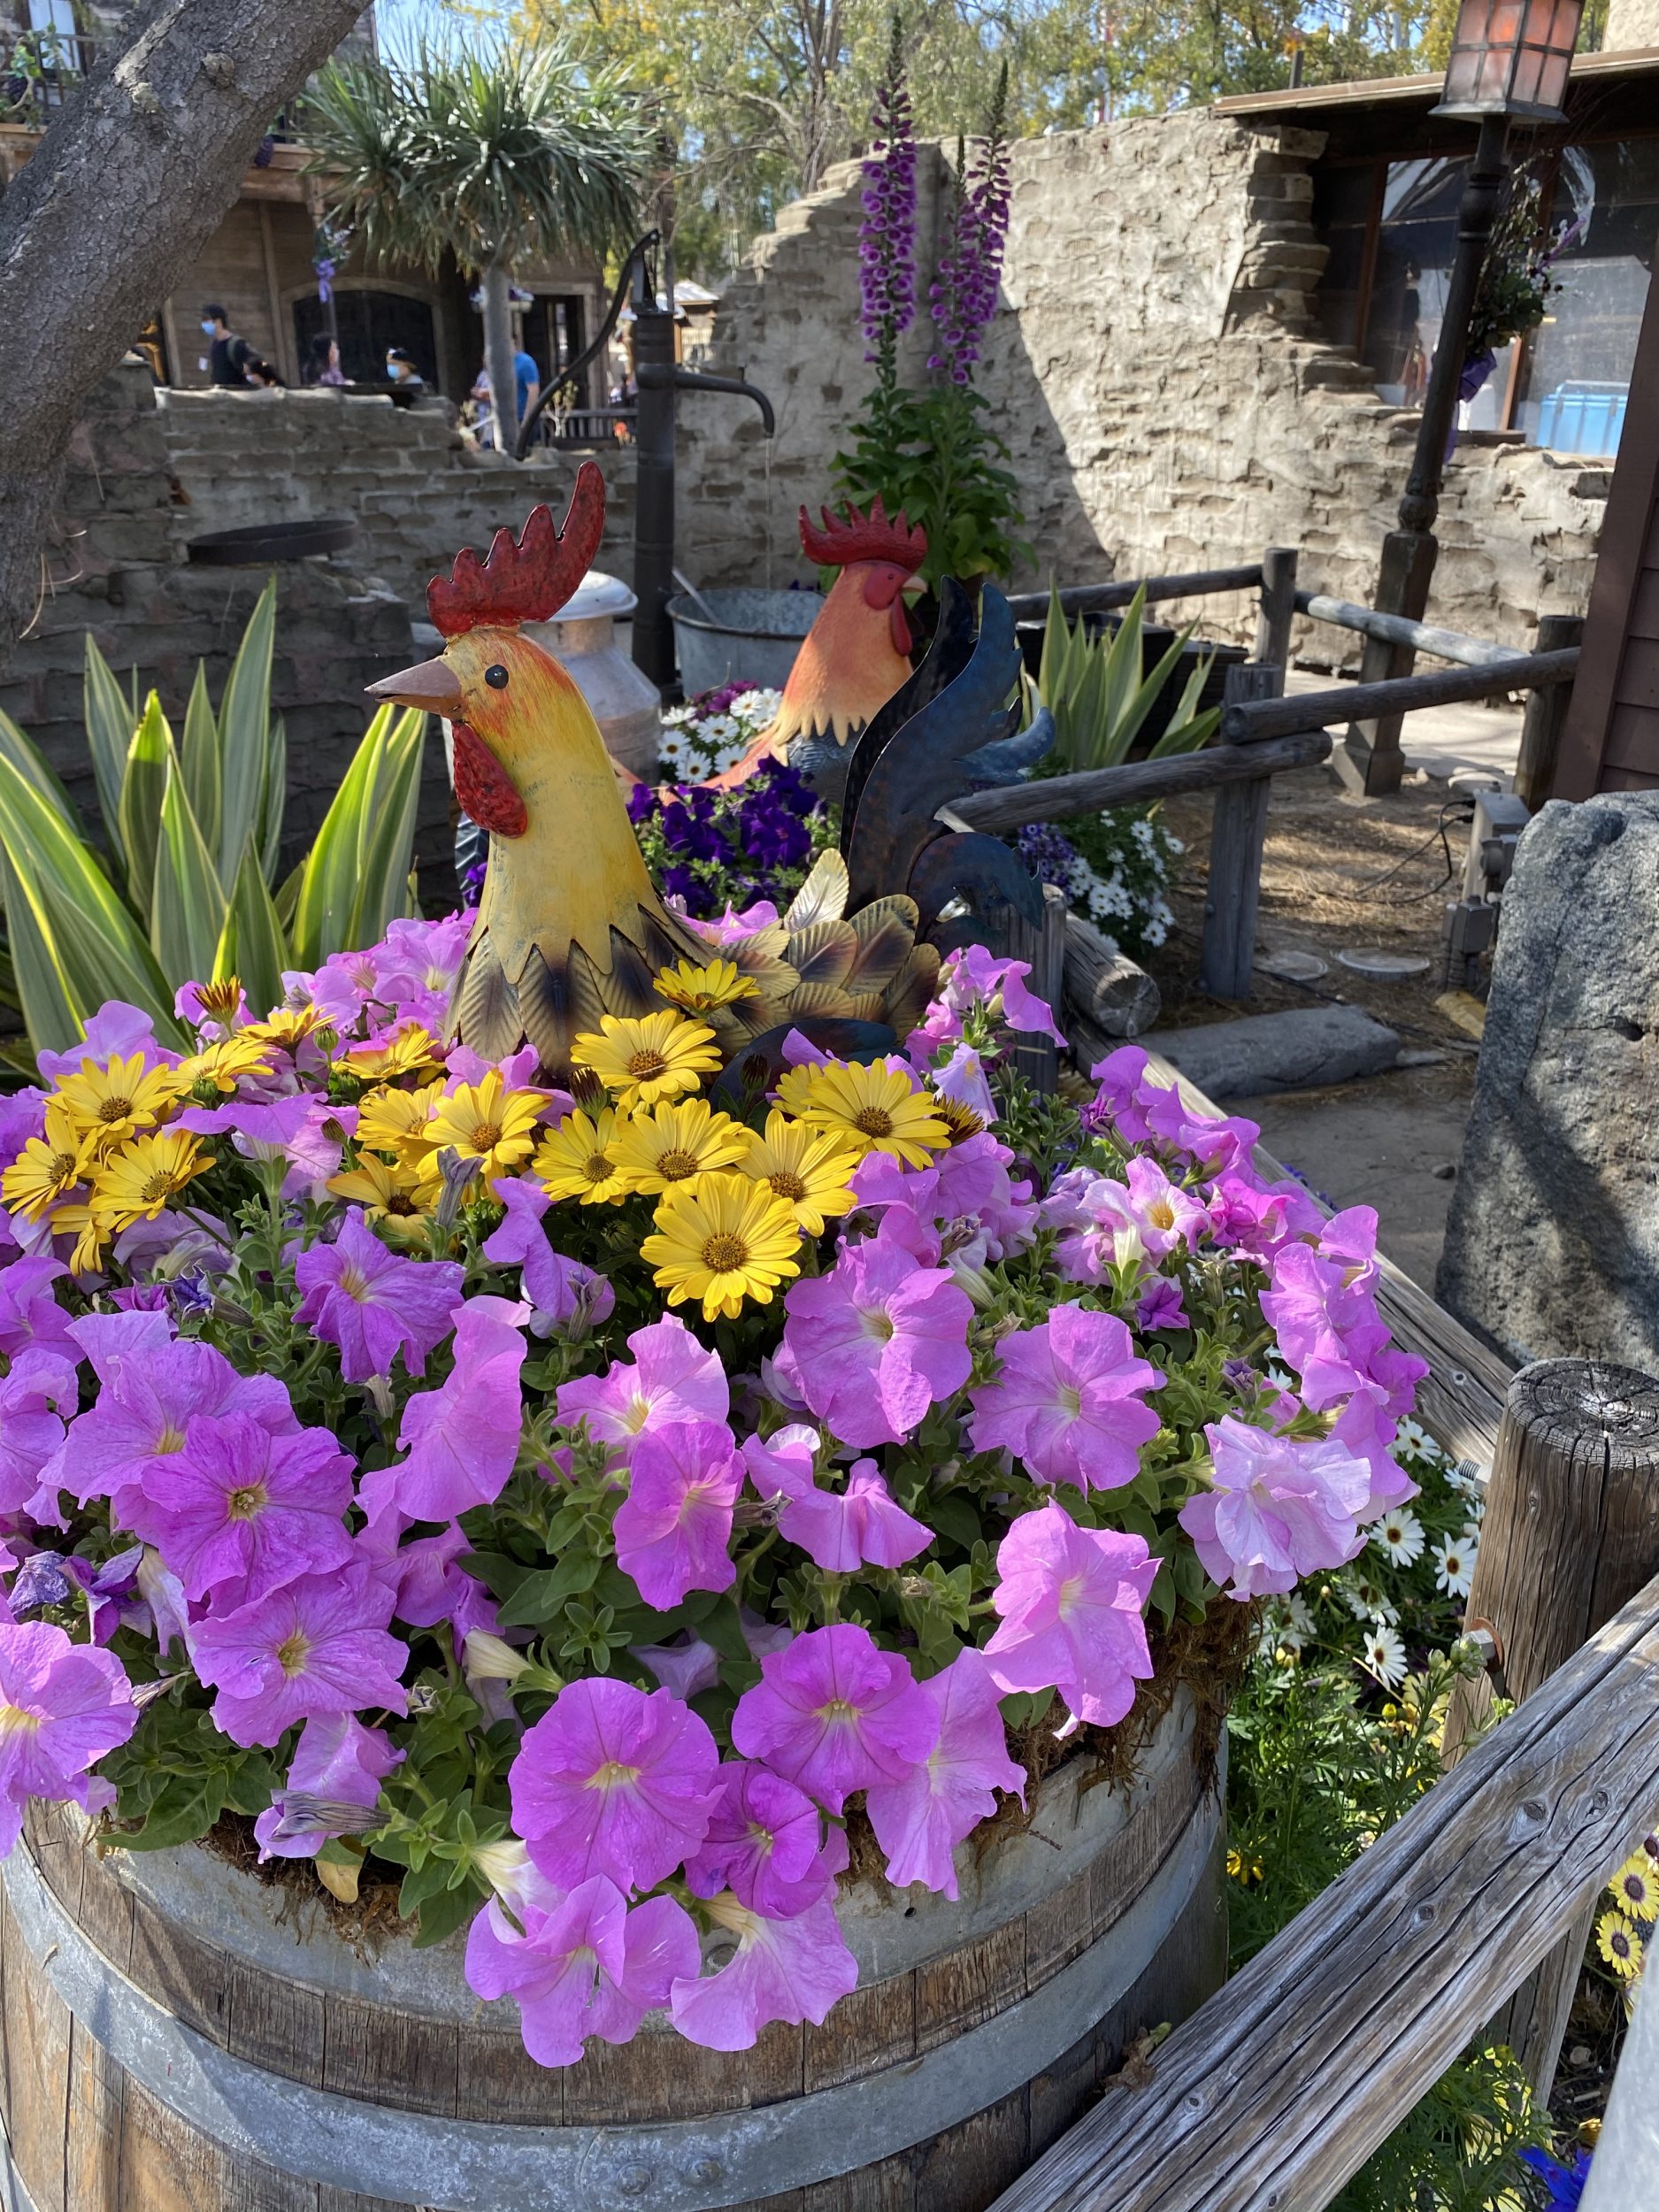 Roosters hiding in the flowers at Knott's Berry Farm